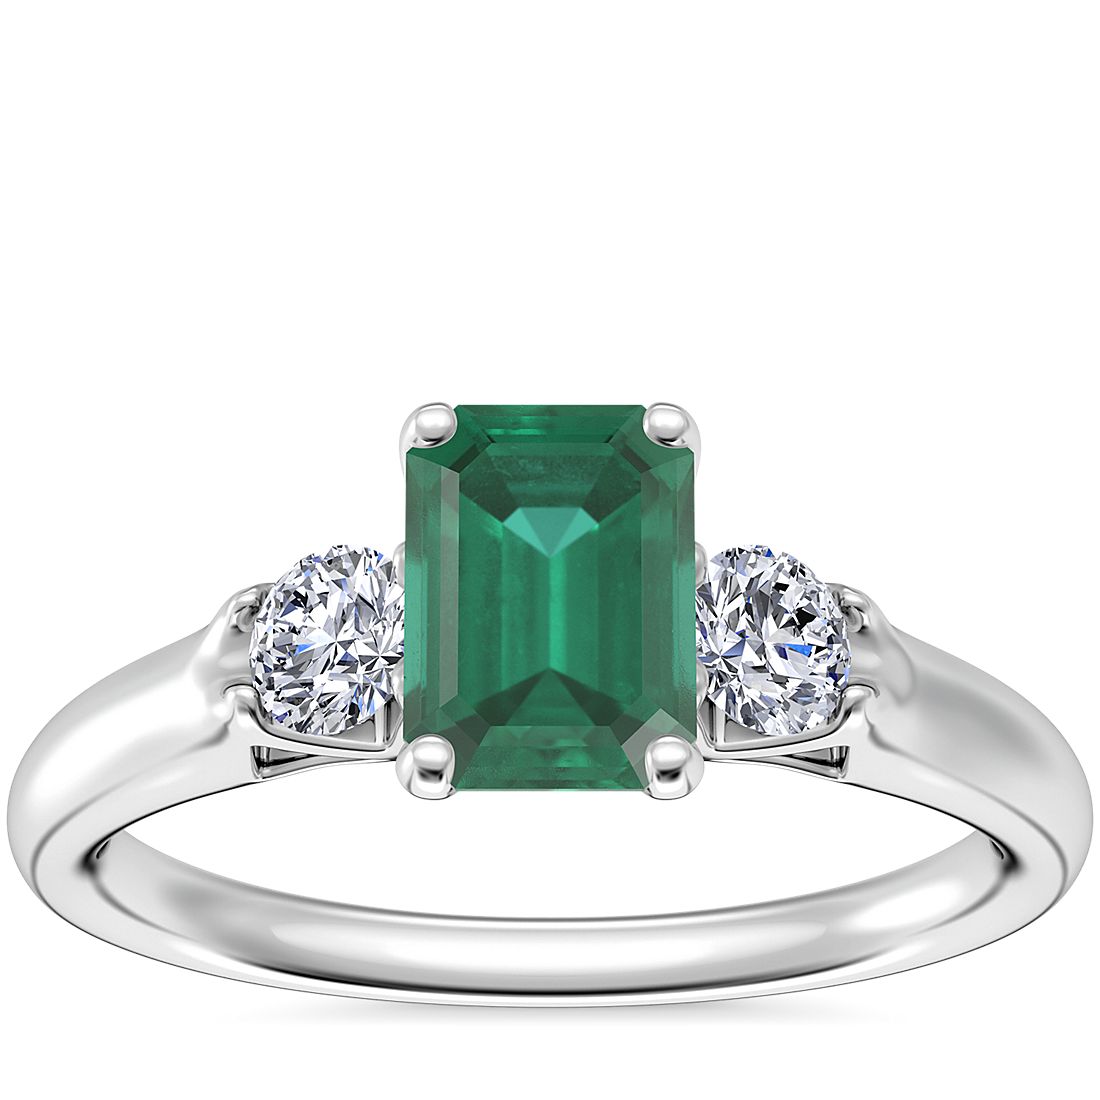 Classic Three Stone Engagement Ring with Emerald-Cut Emerald in 18k White Gold (7x5mm)